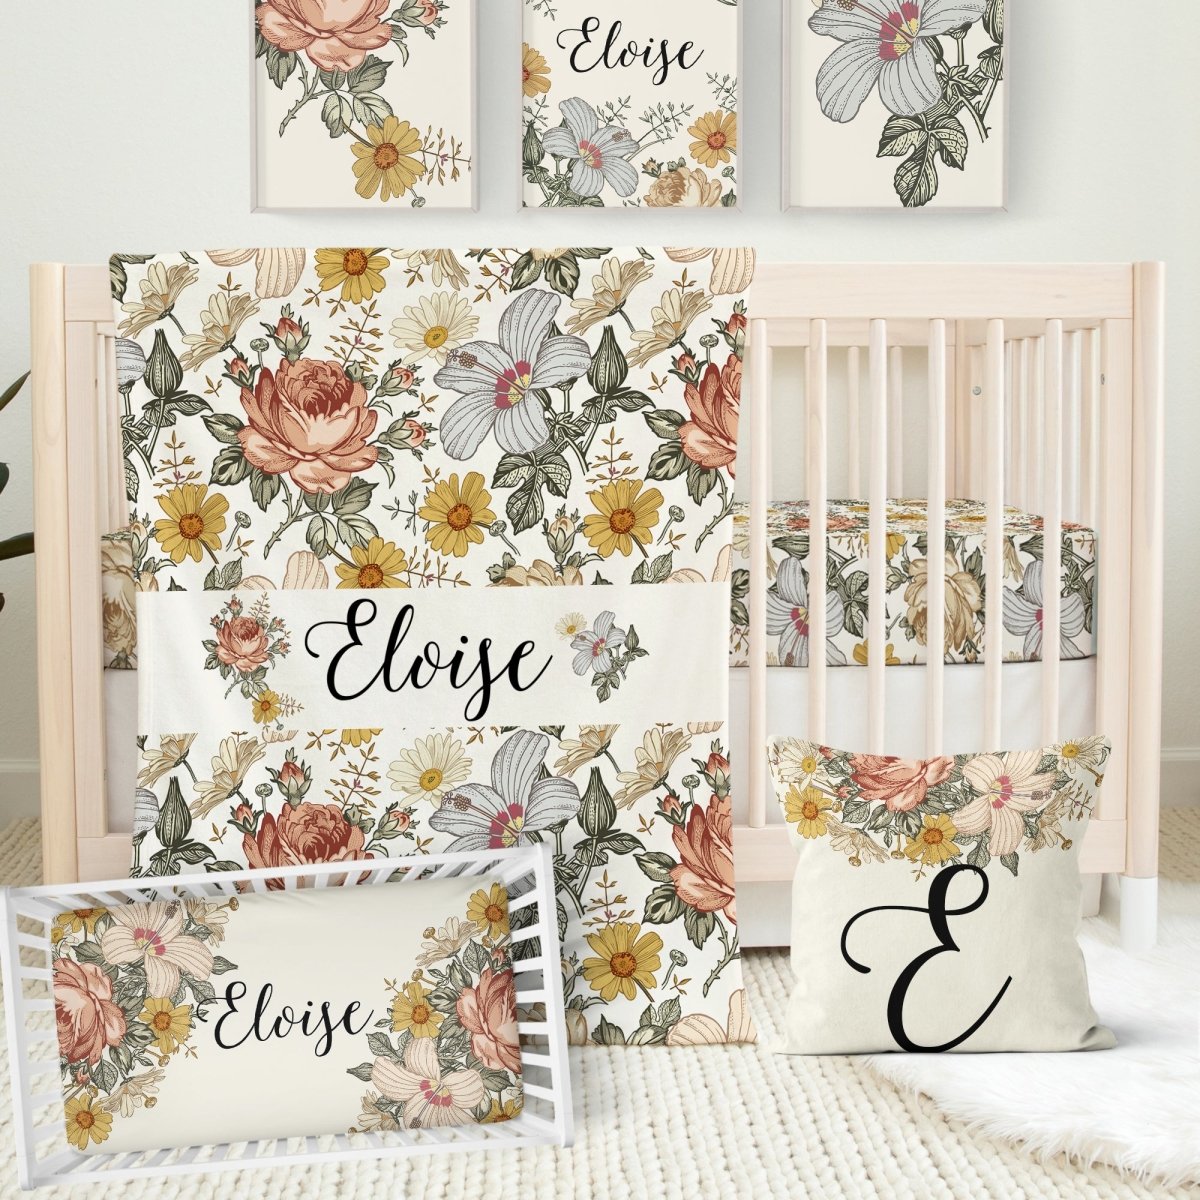 Vintage Earthy Floral Personalized Crib Sheet - gender_girl, Personalized_Yes, text